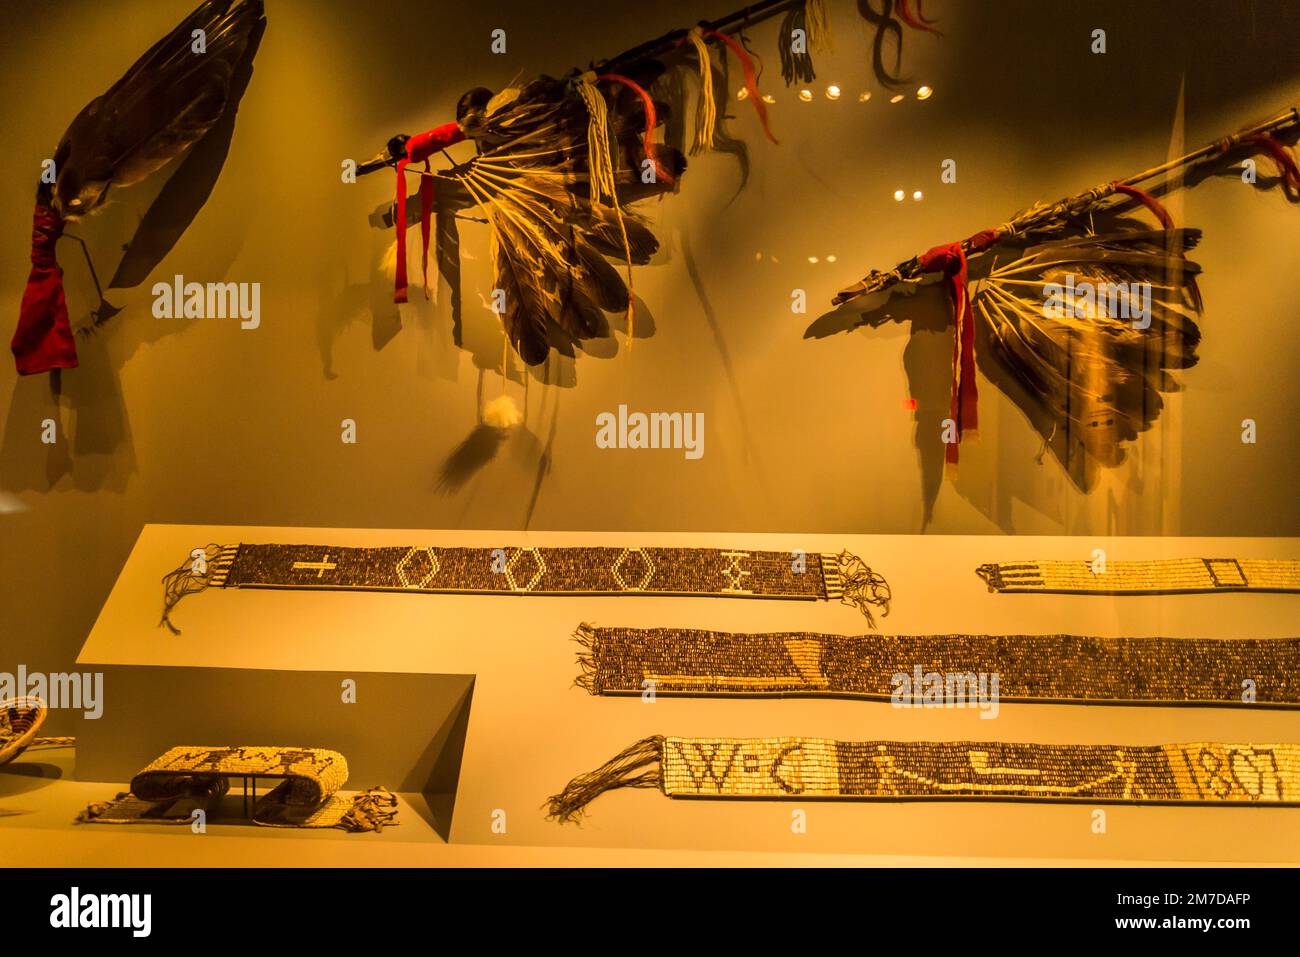 Exhibits representing Native American culture and tradition, National Museum of the American Indian, Washington, D.C., USA Stock Photo